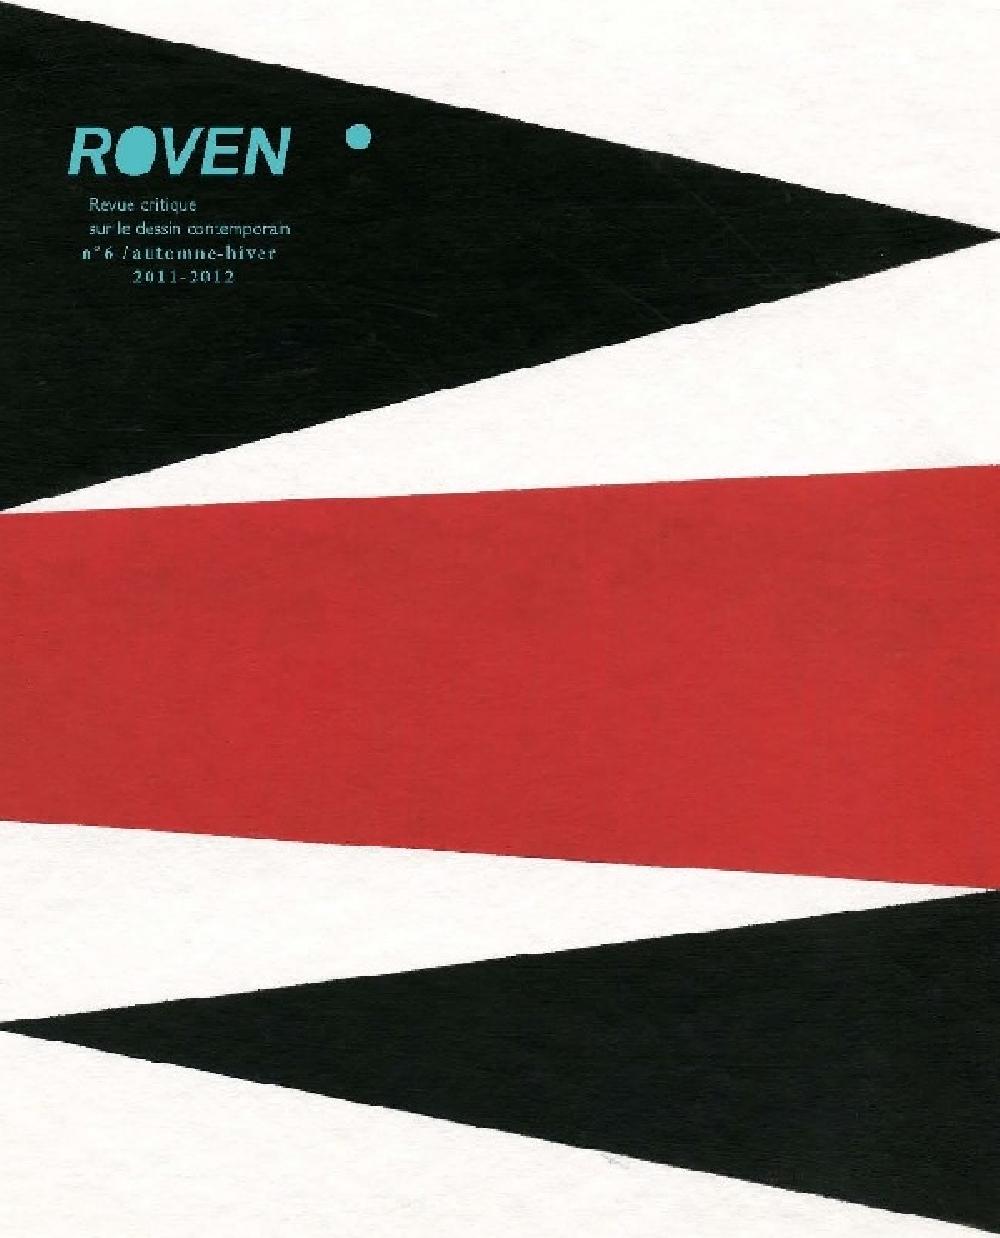 Roven n°6